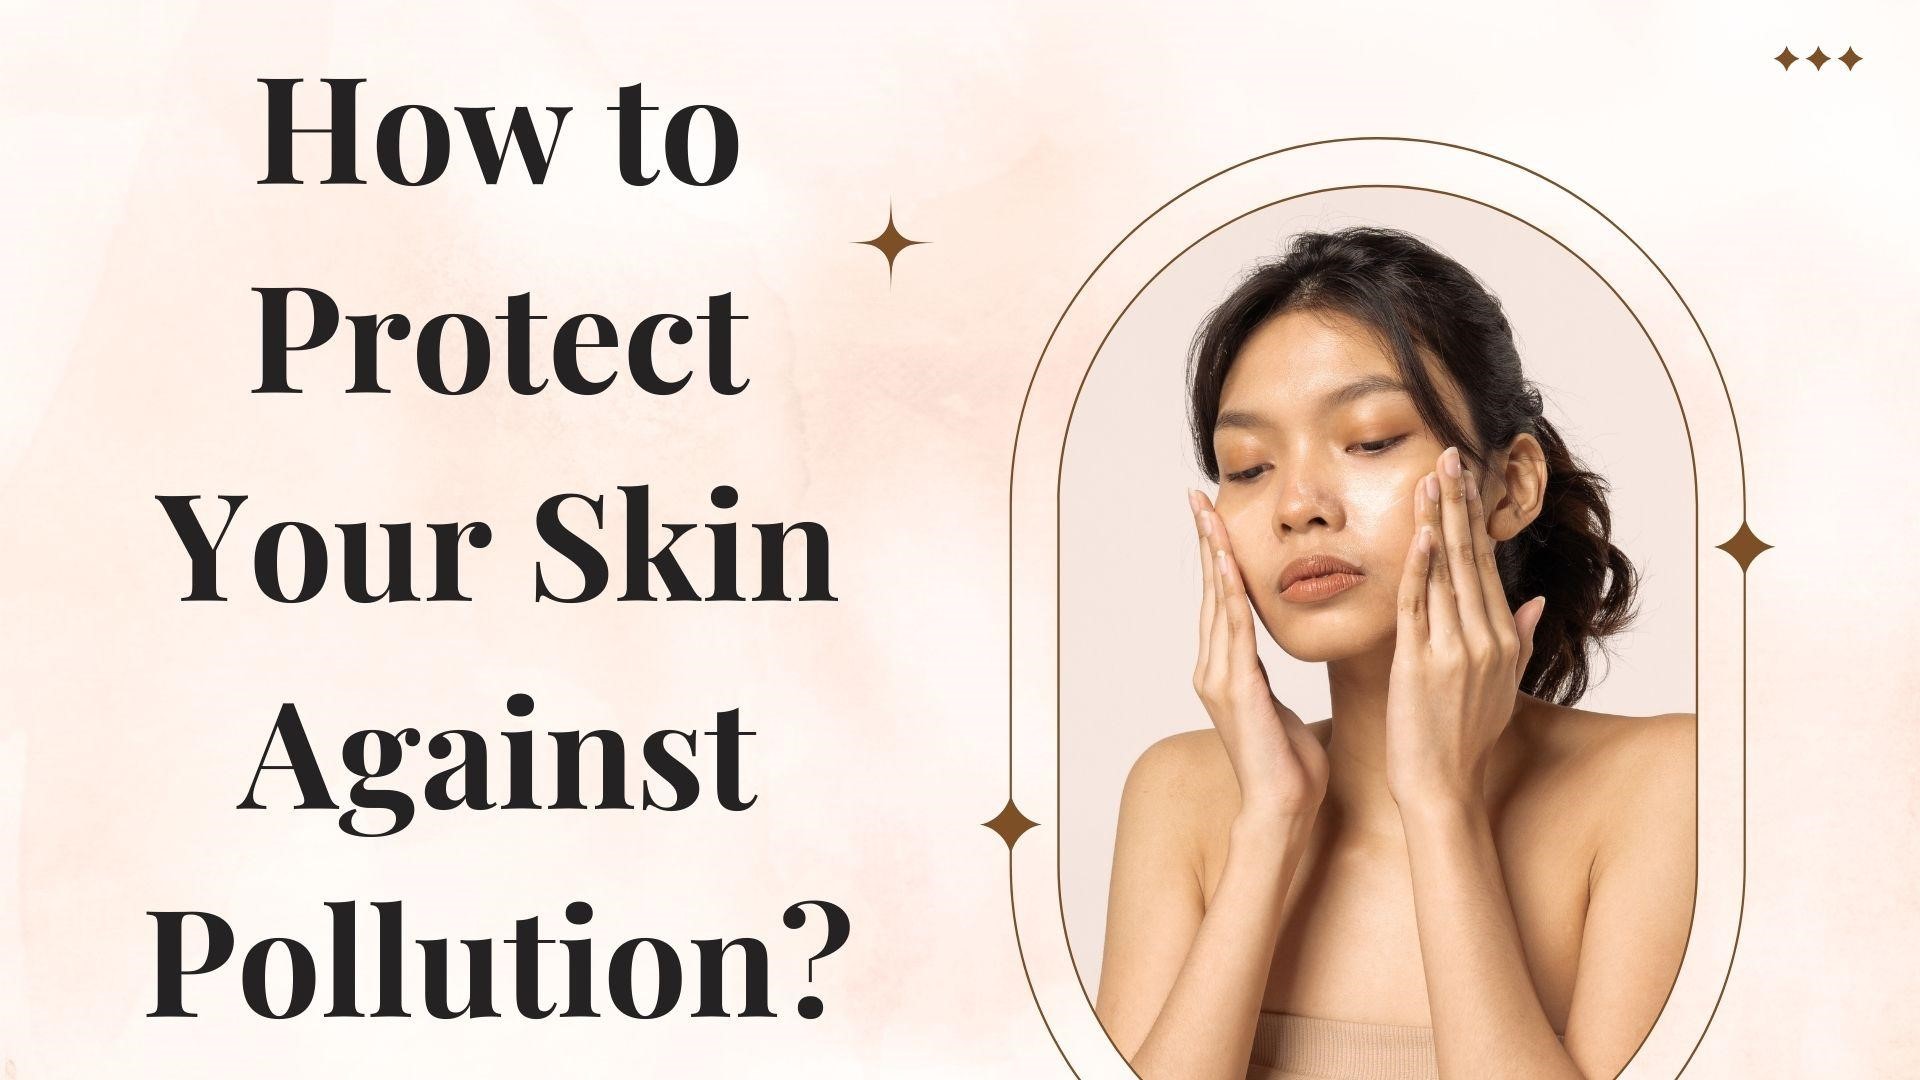 How to Protect Your Skin Against Pollution